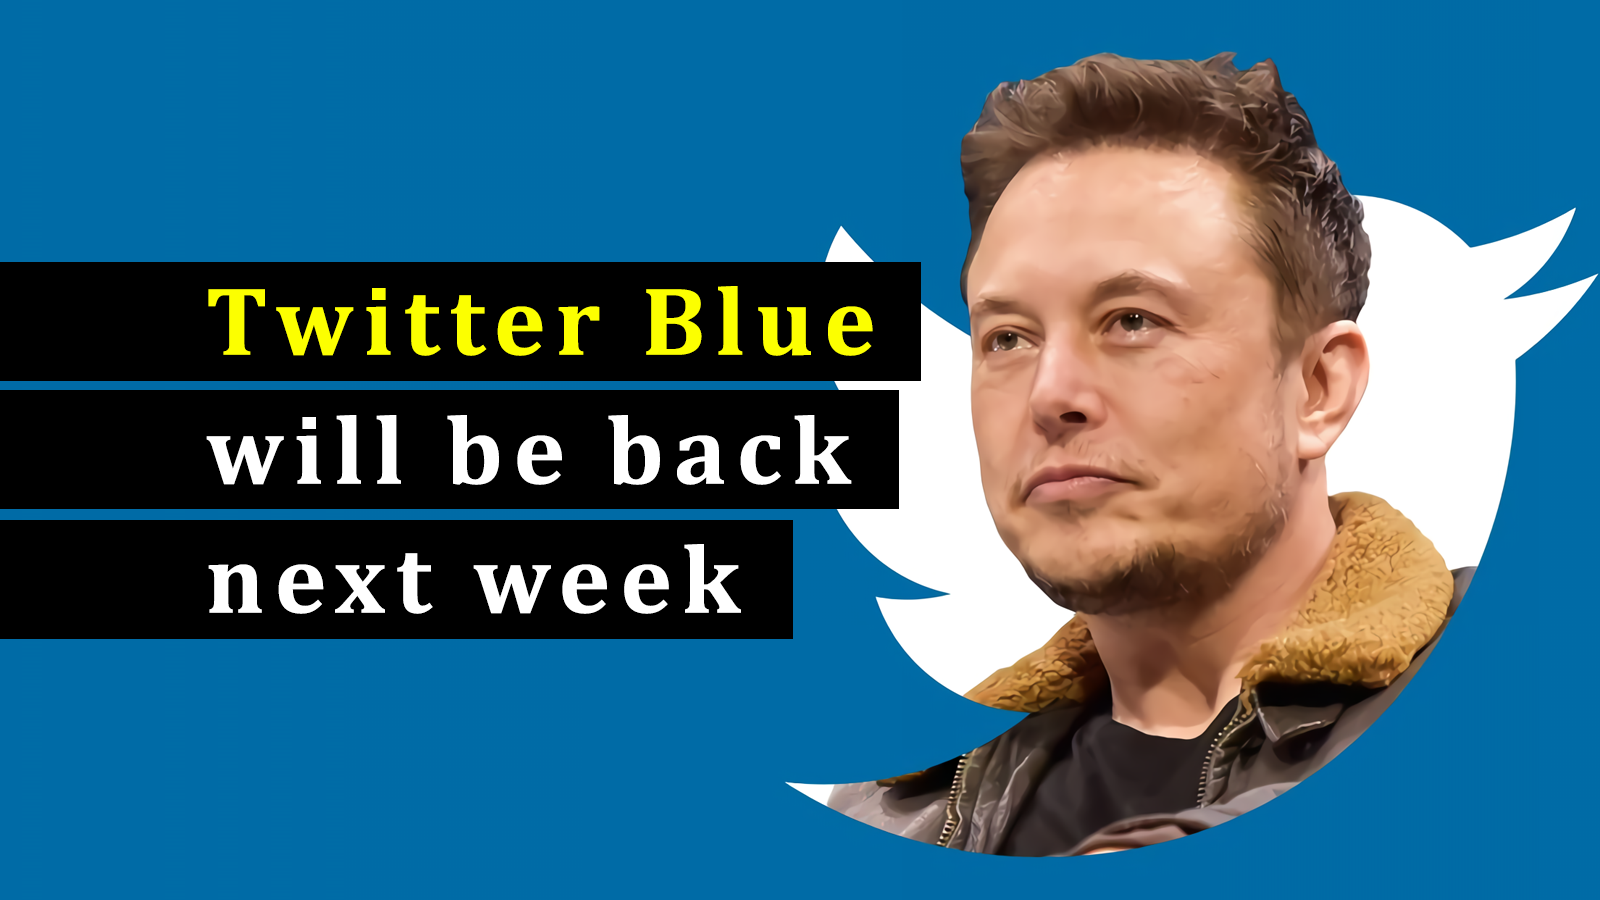 Elon Musk says Twitter Blue will probably be back by the end of next week